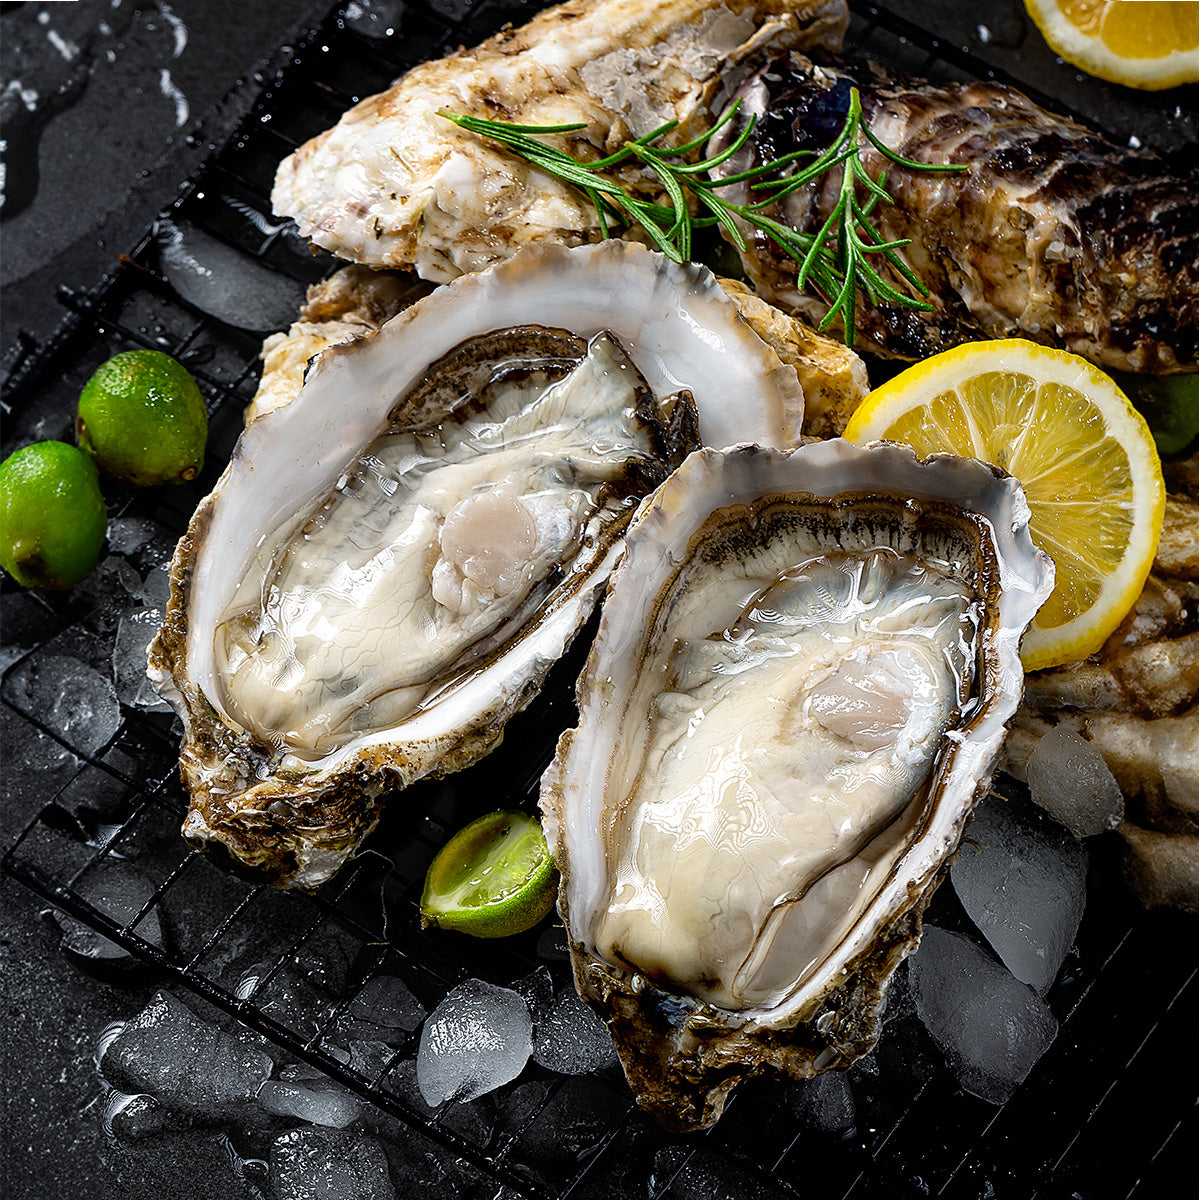 Oyster on grill with ice lime lemon tasty fresh oysters